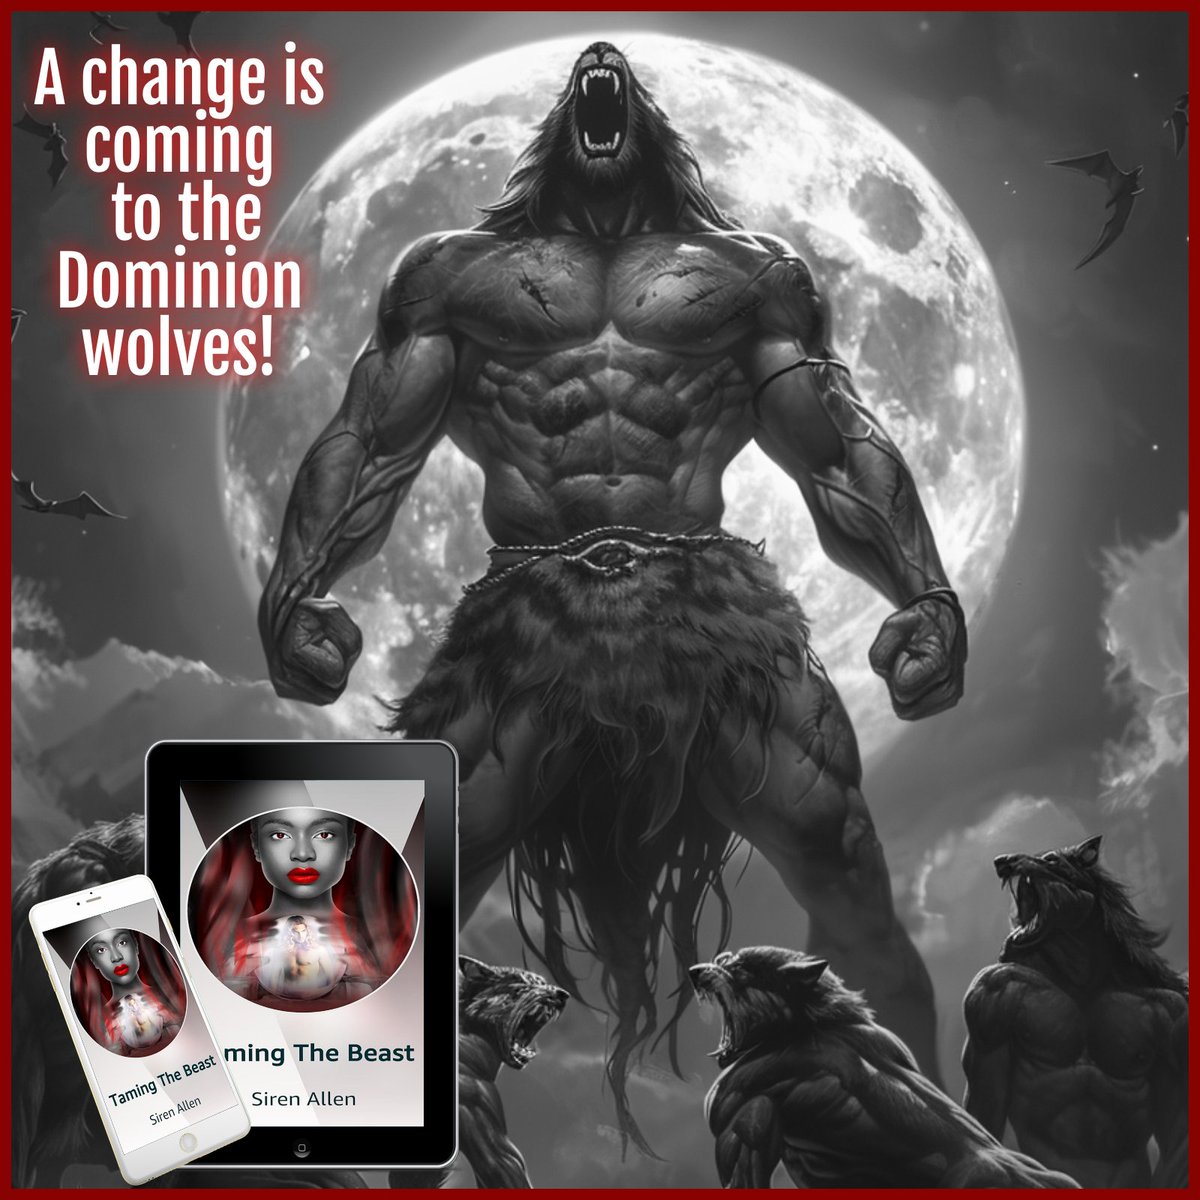 💋New Episode!💋 
A change is coming to the Dominion wolves in the latest episode of Taming The Beast. New to the series? 
Read the first 10 episodes for FREE on #KindleVella and prepare to be tamed by a beast! 
amzn.to/3MbhTYx 
#PNR #IRromance